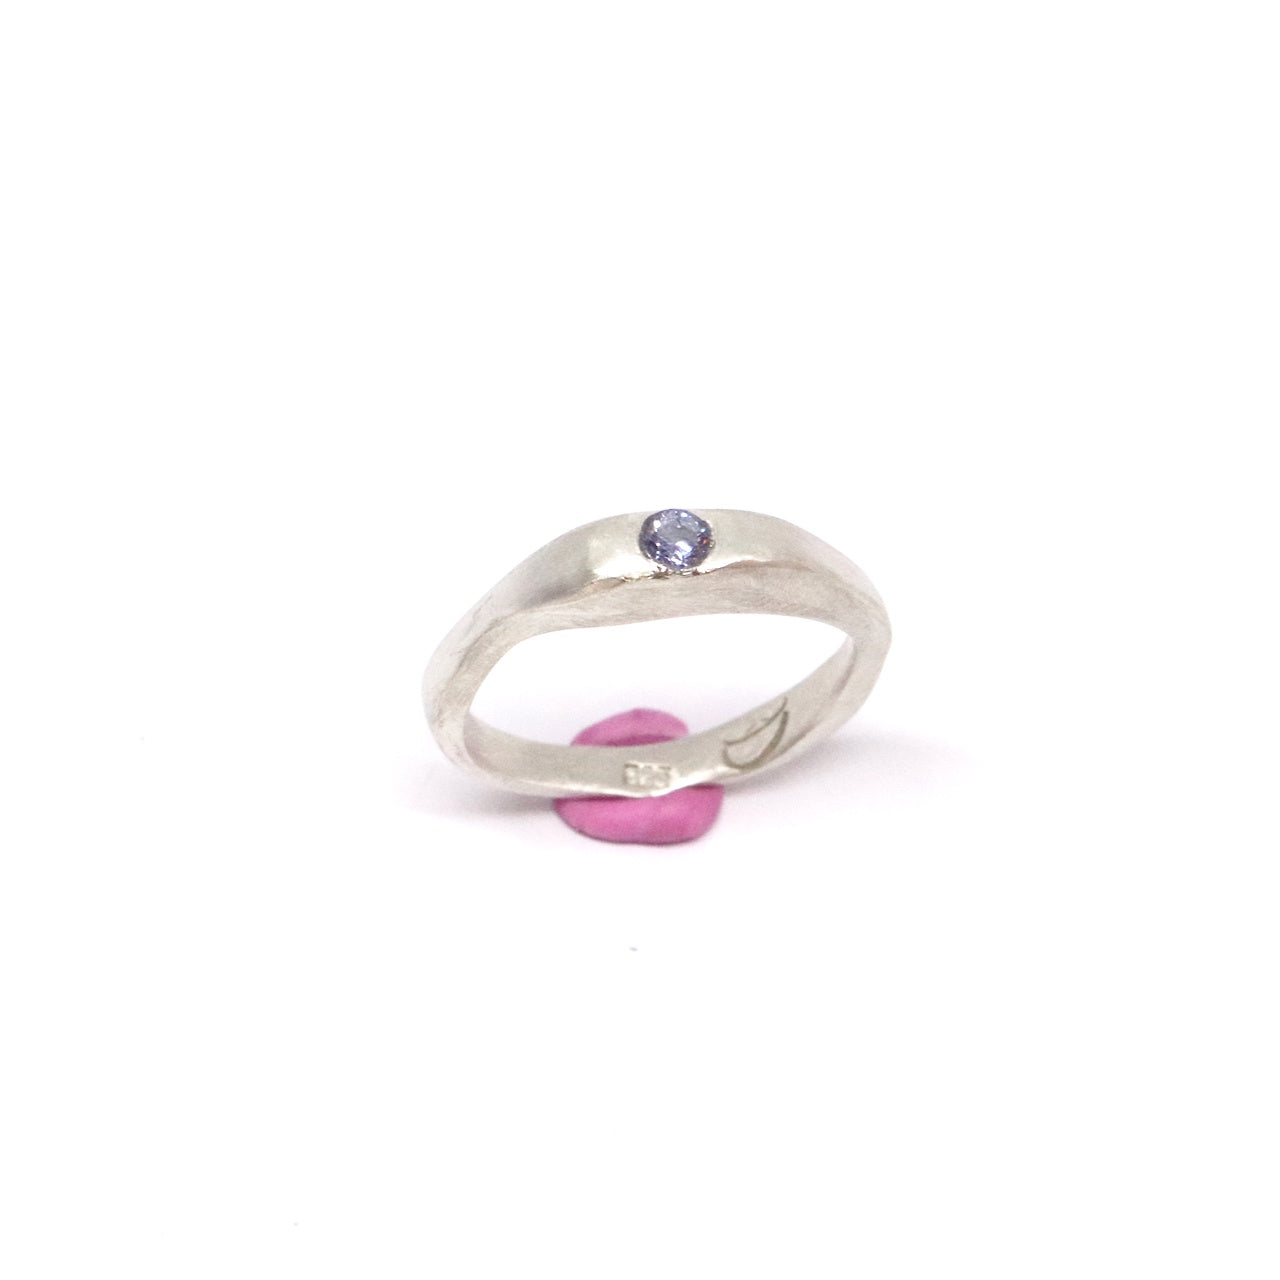 Wonky Ring - Sterling Silver & Tanzanite Cubic Zirconia (Size Q)